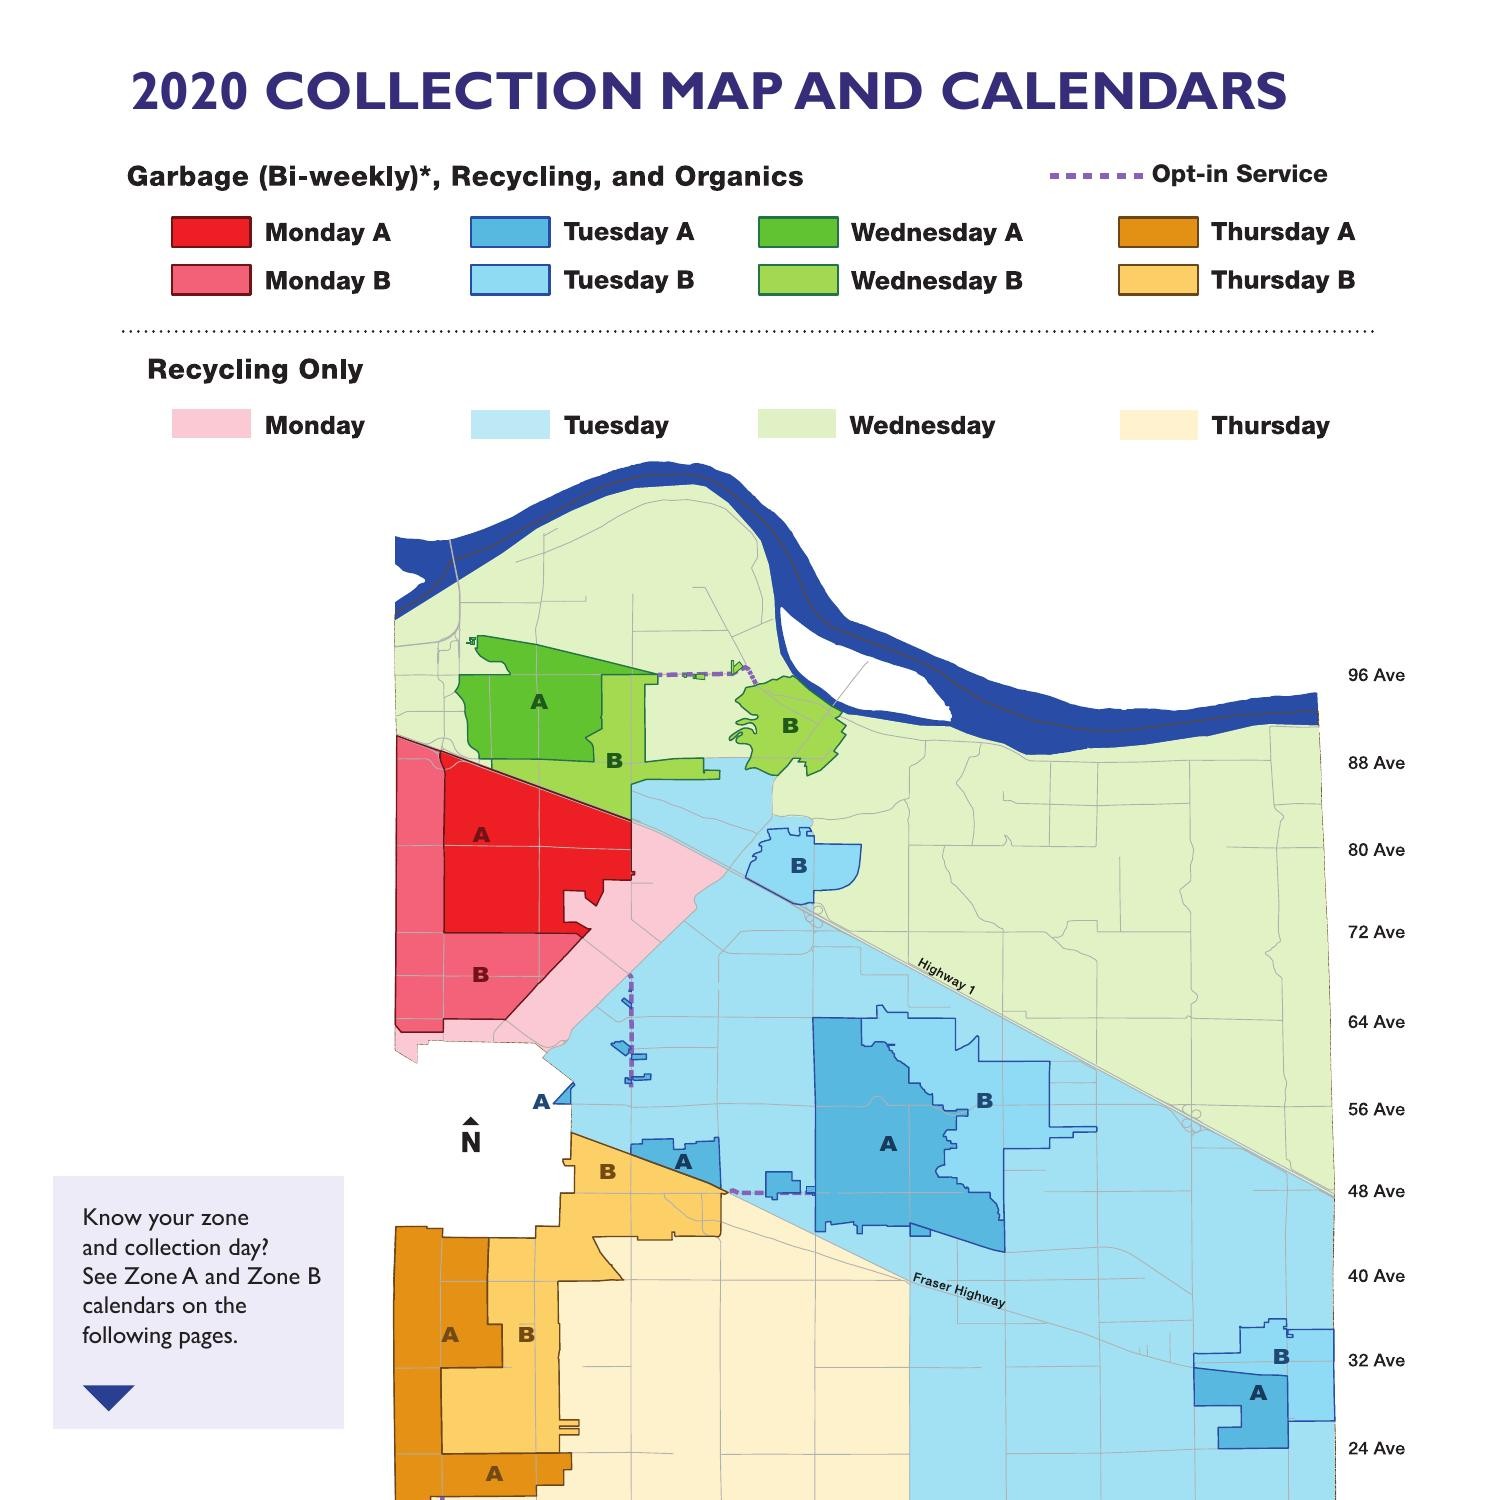 Township of Langley 2020 Collection Calendars and Map.pdf DocDroid